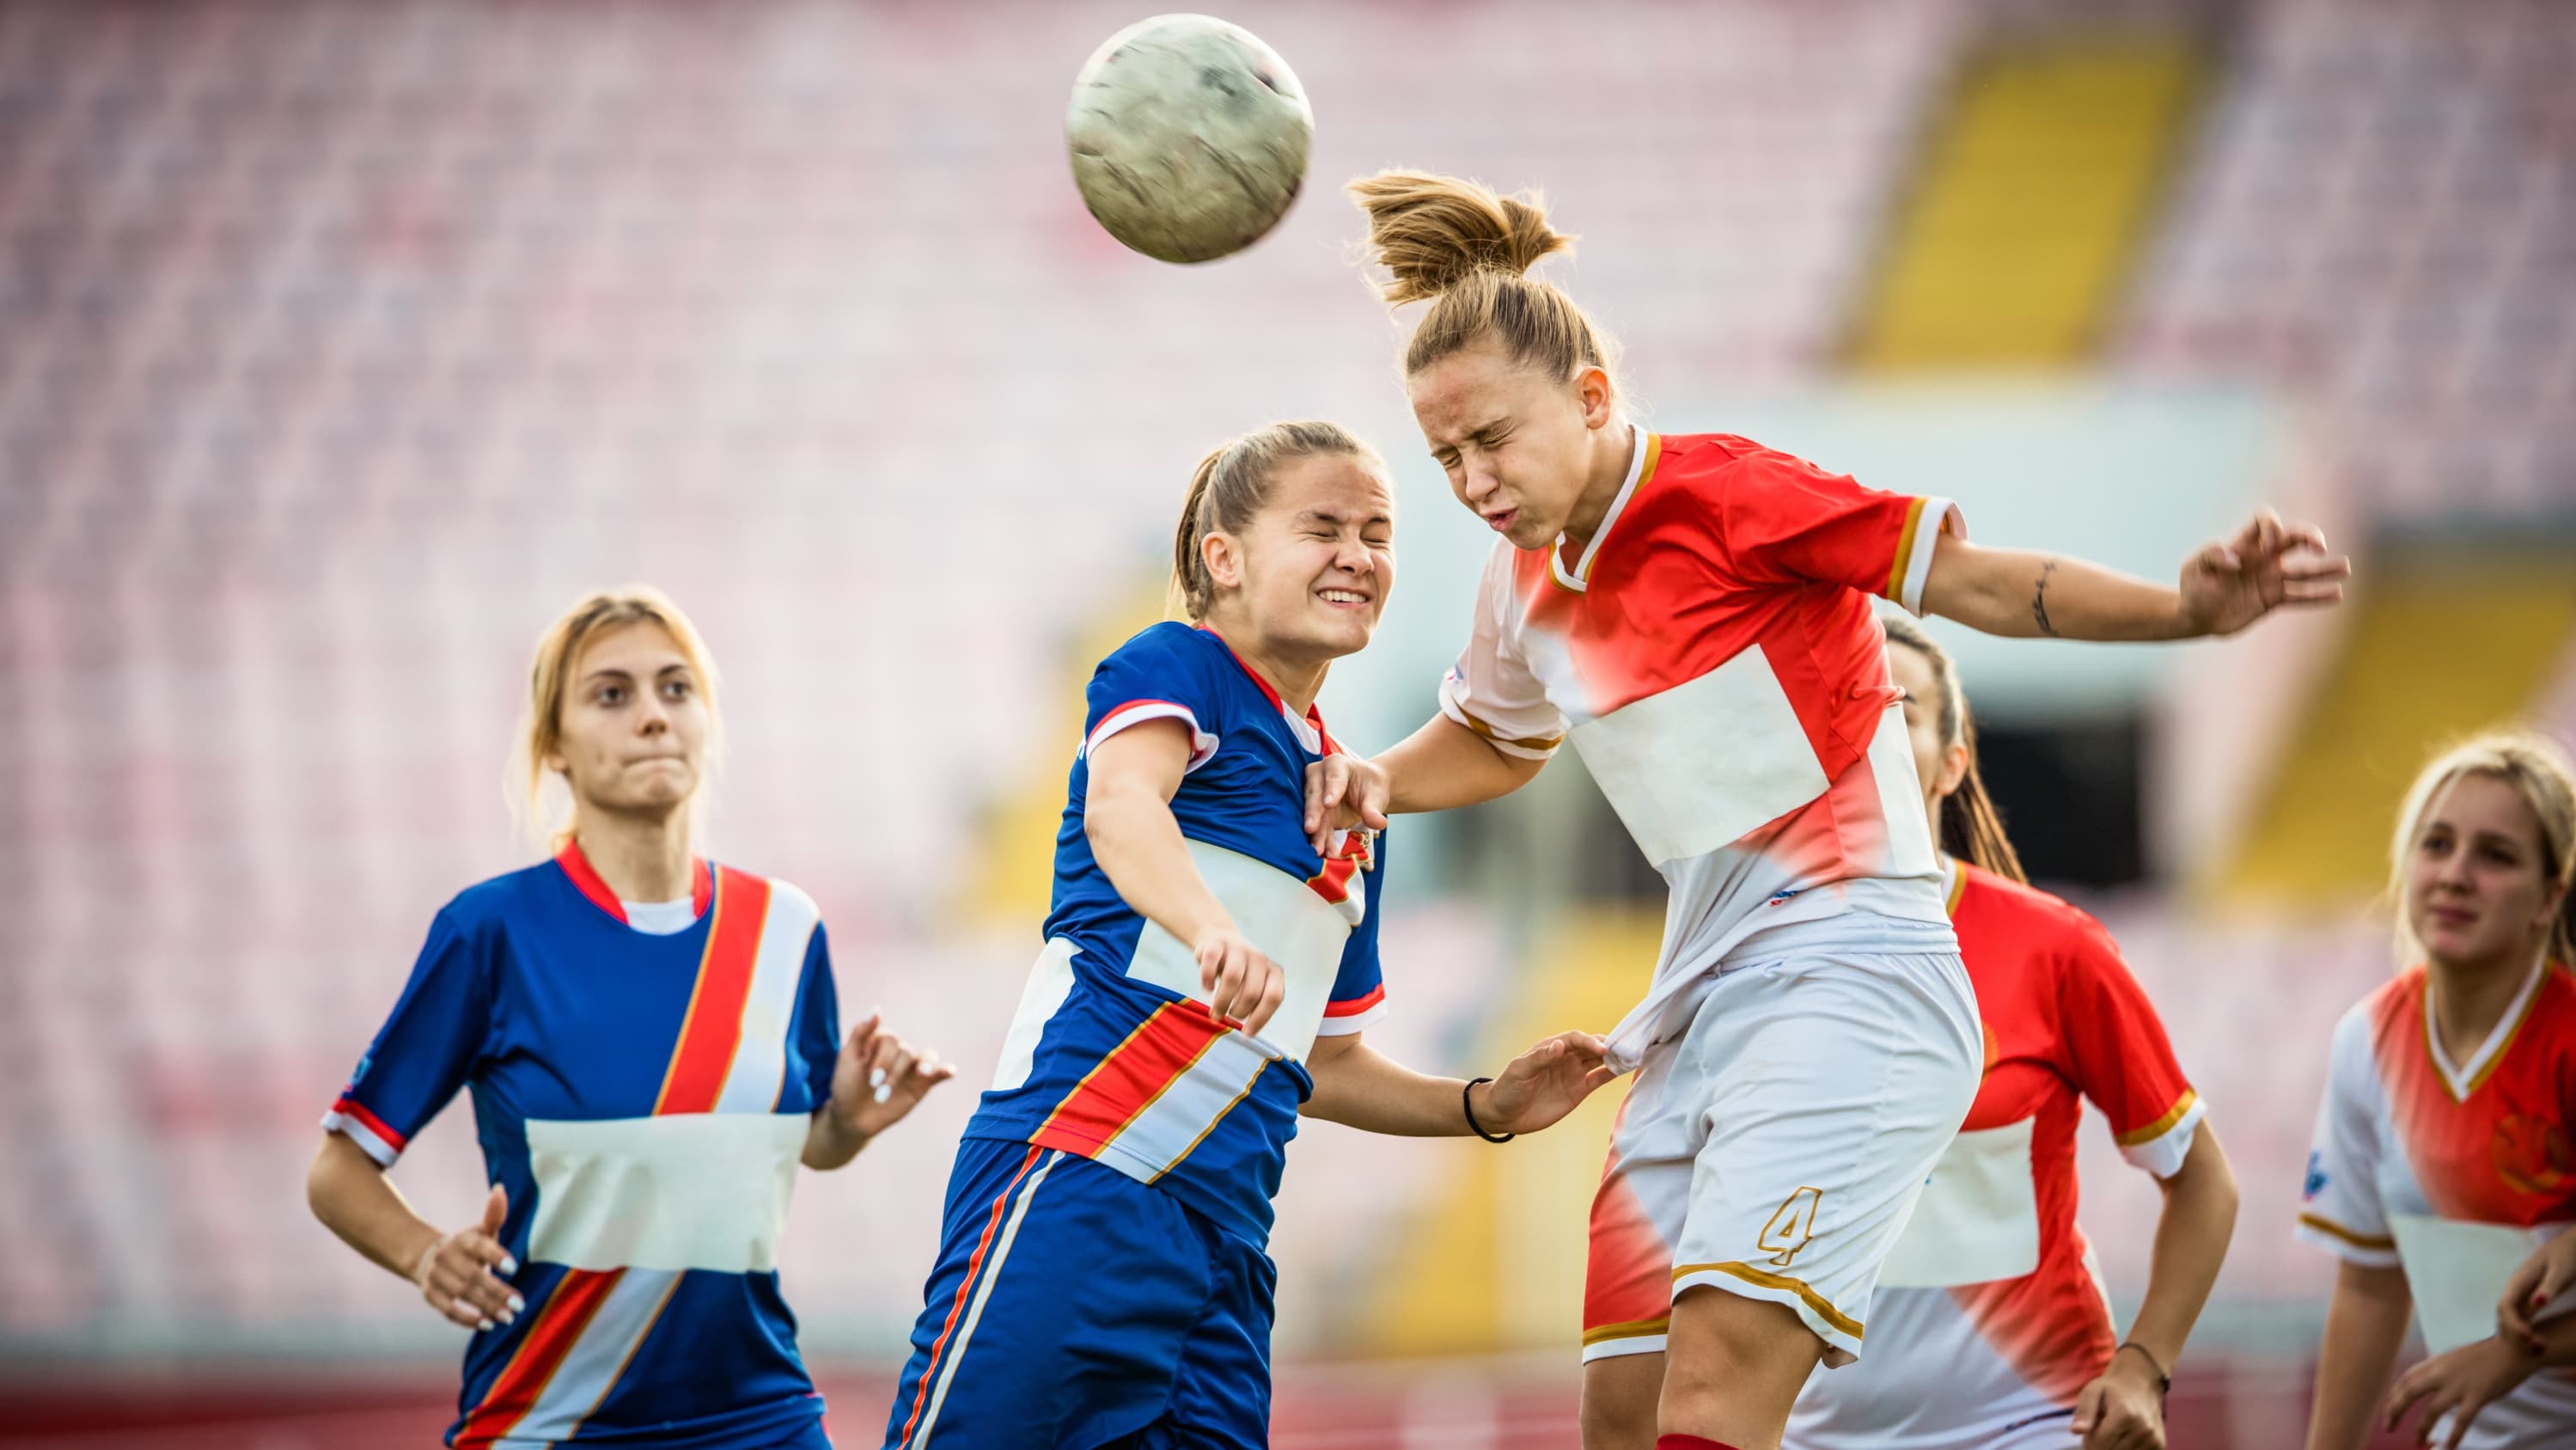 Two female soccer rivals heading the ball on a match, possibly at risk for concussion